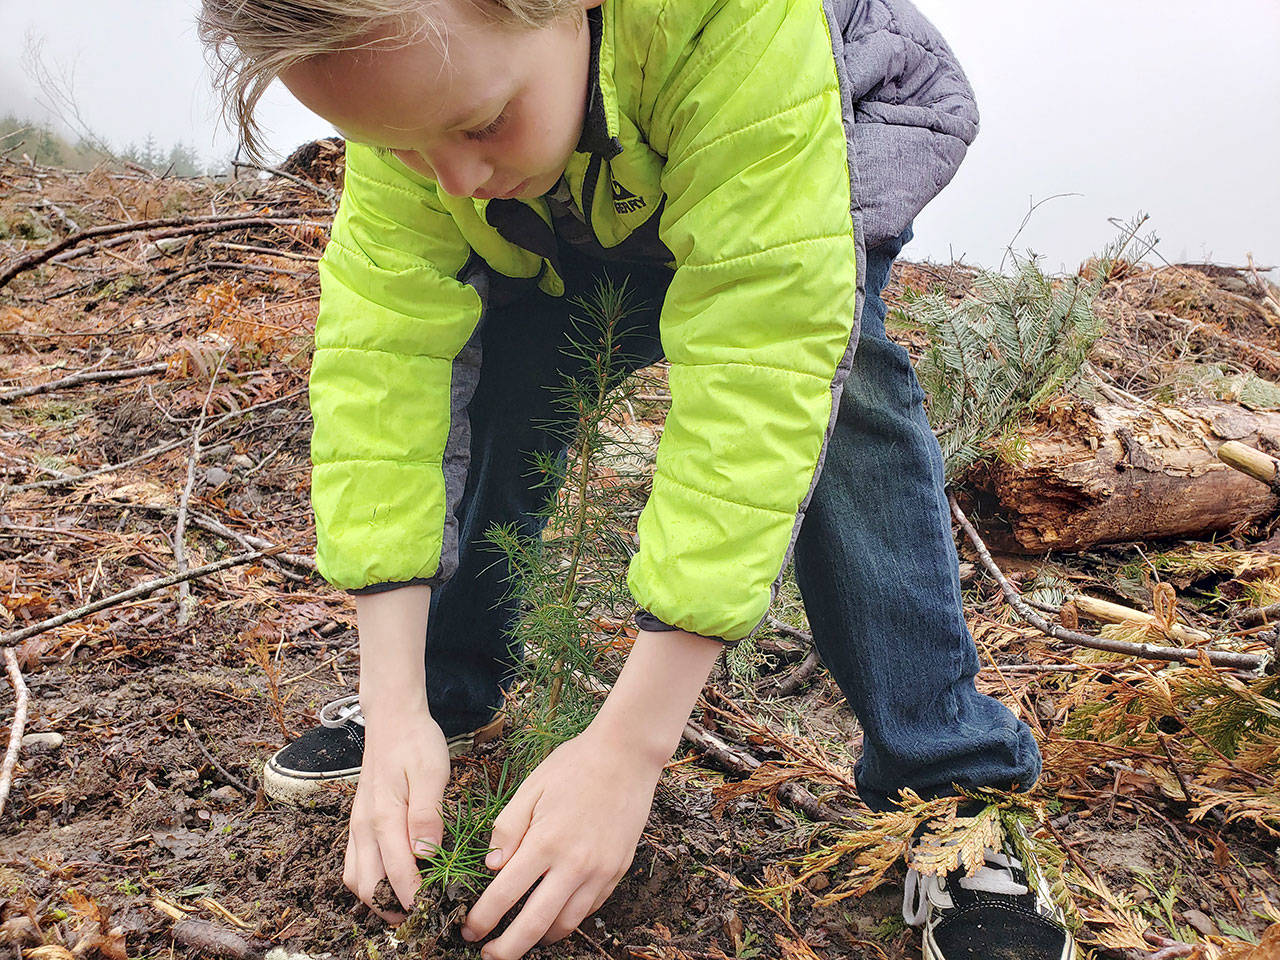 Phineas Tippets, a second-grader at Greywolf Elementary School, plants a tree on state land near Fish Hatchery Road on April 18. Photo by Ryan Tippets/Washington State Department of Natural Resources